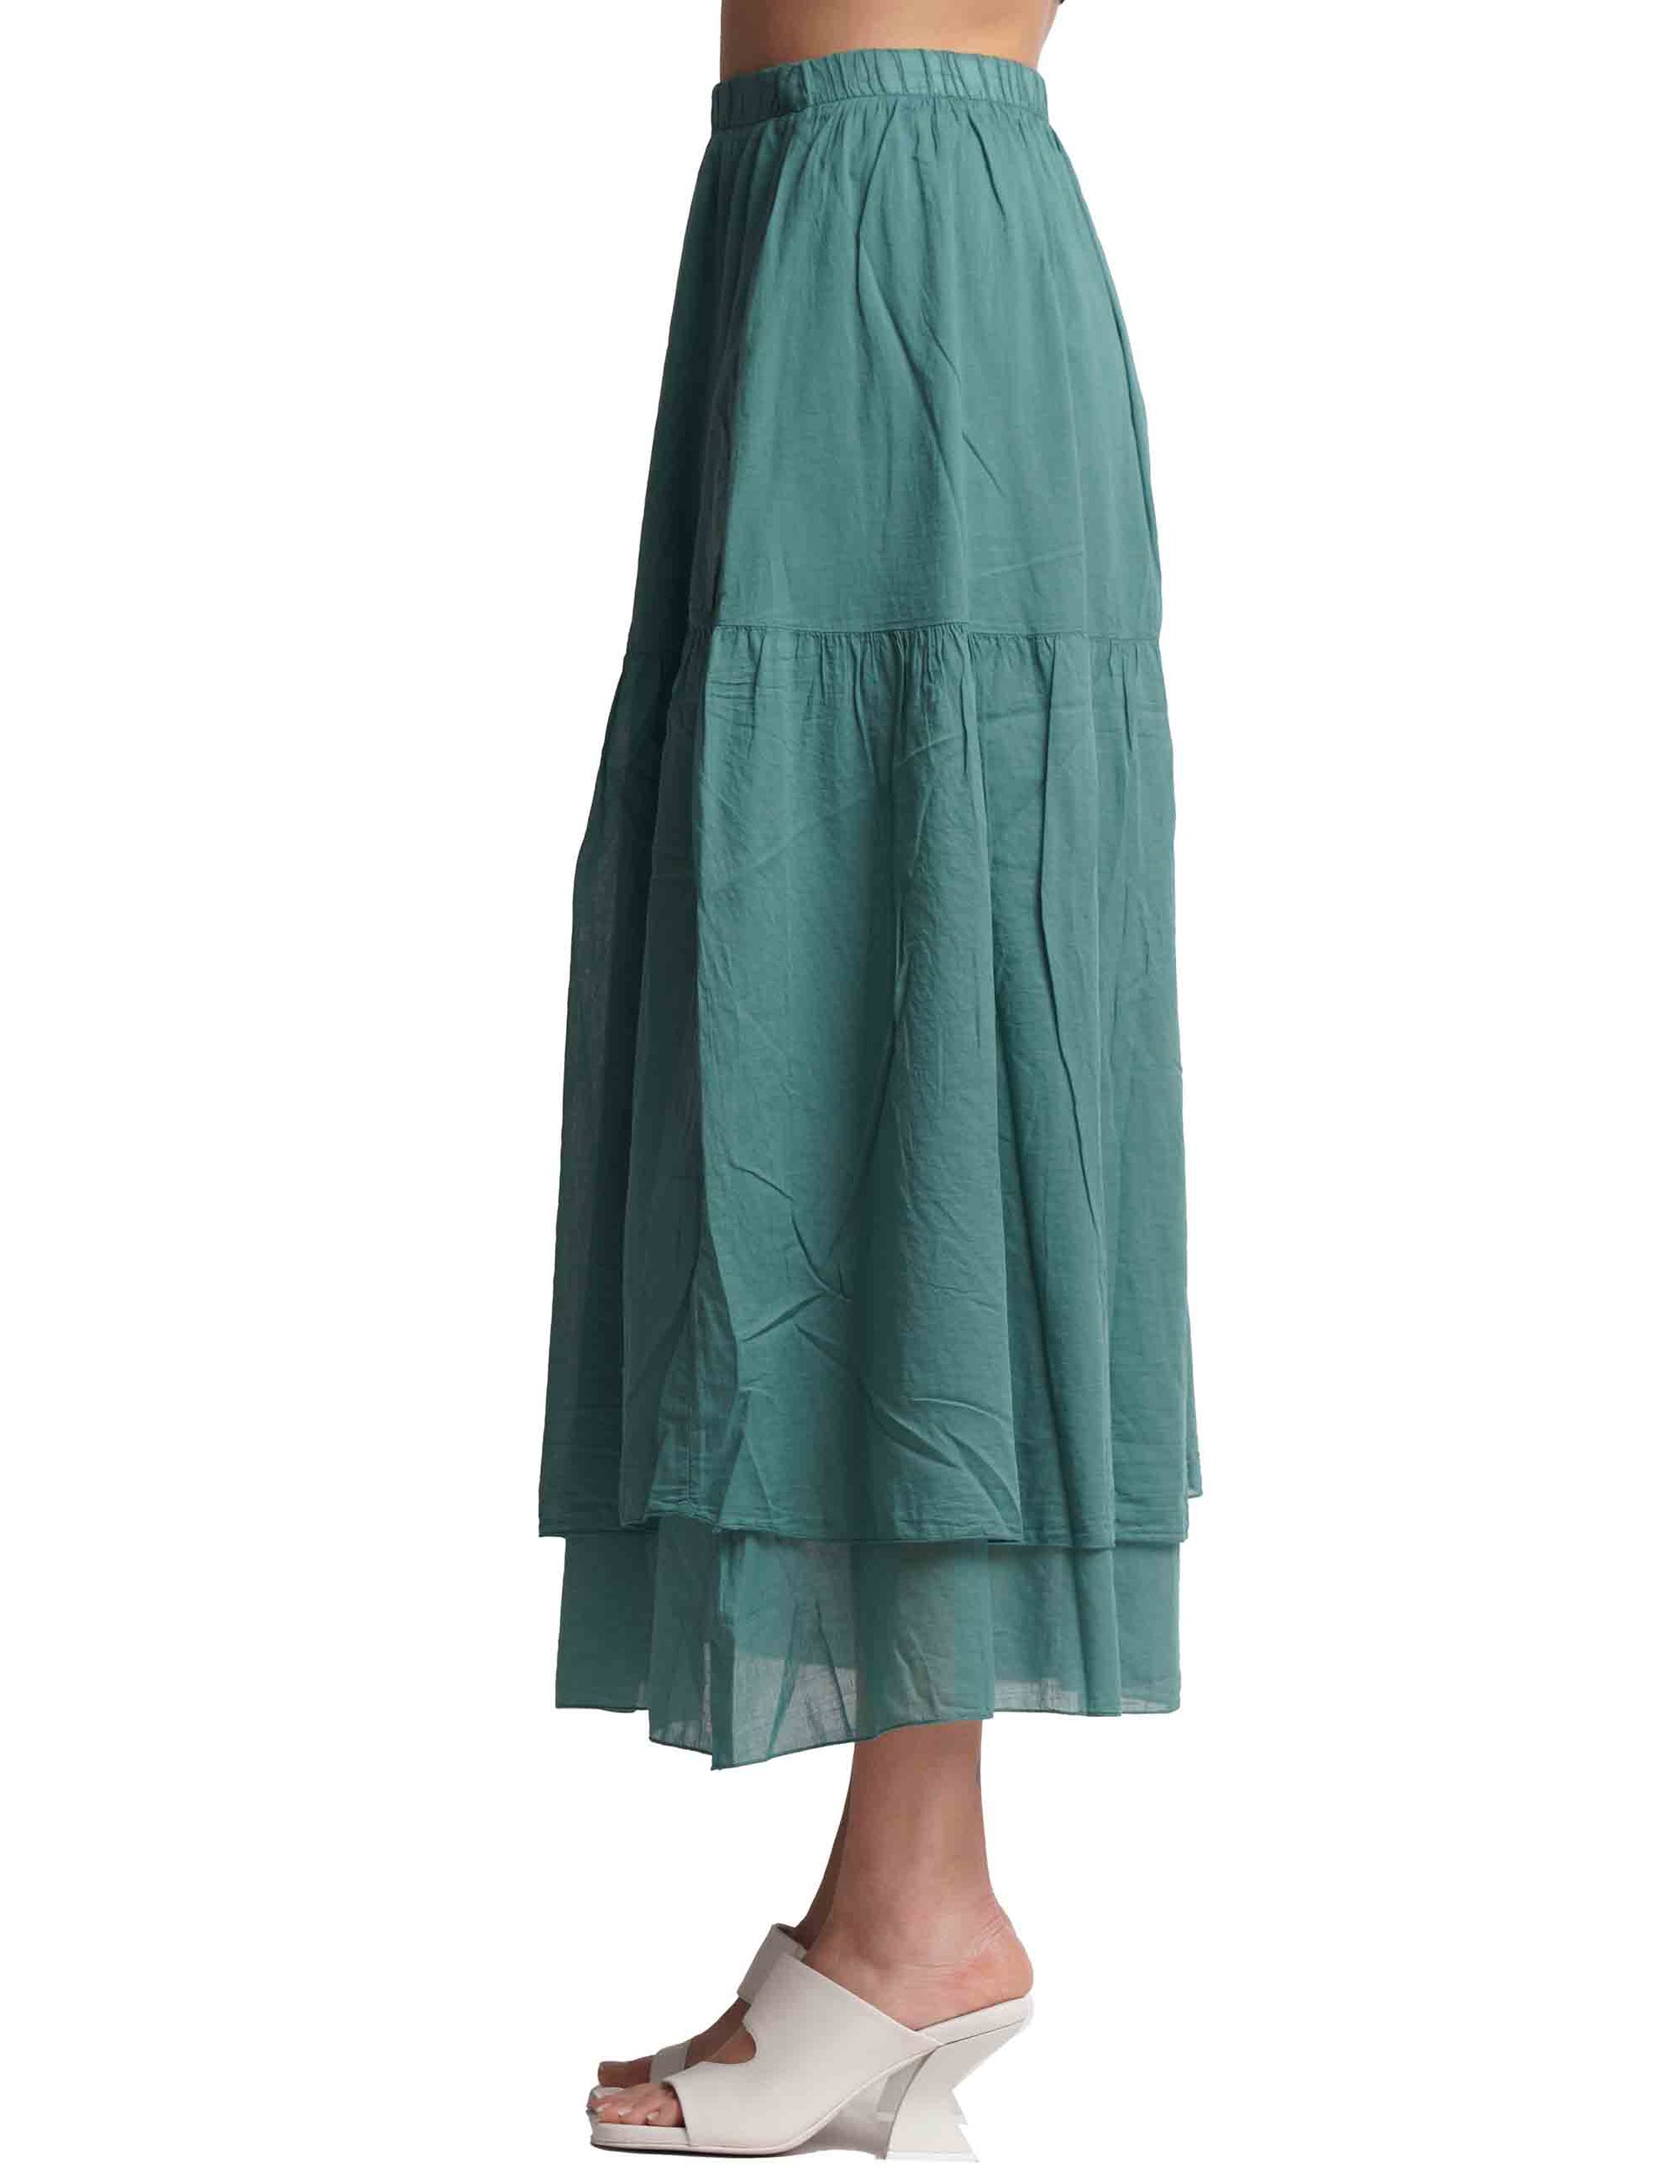 Gonne lunghe donna in cotone verde